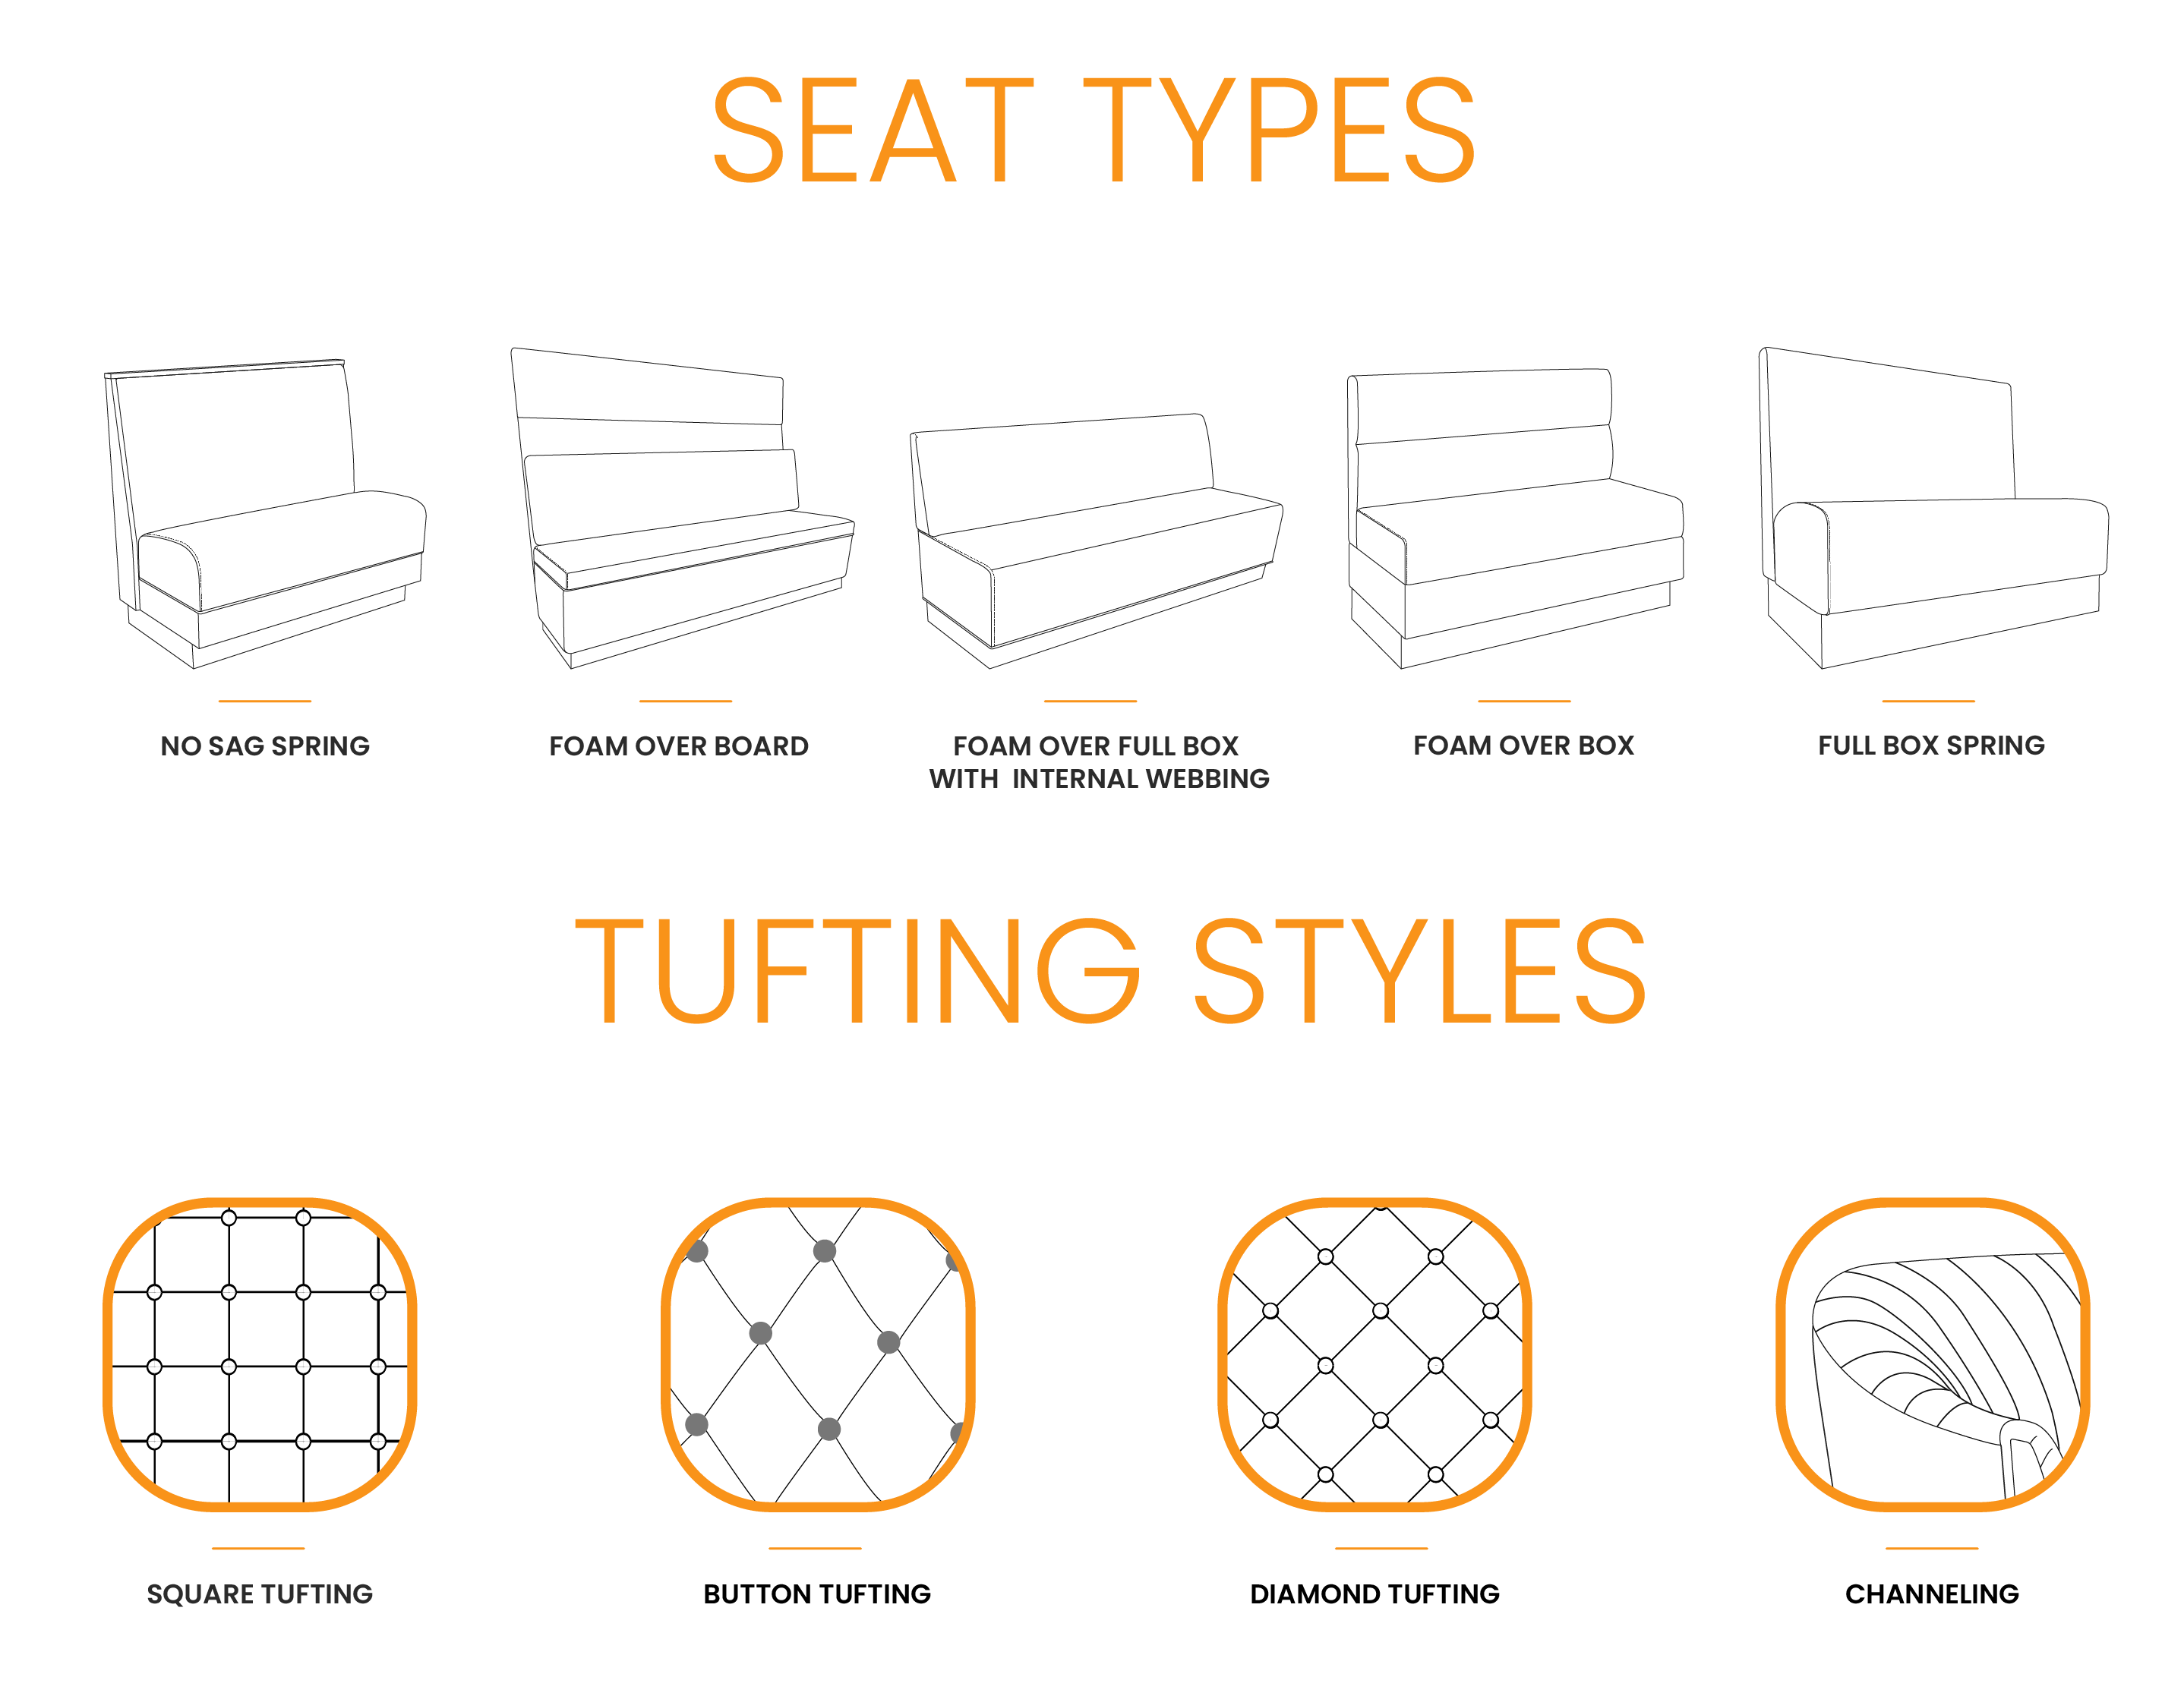 booth seat types and tufting style chart